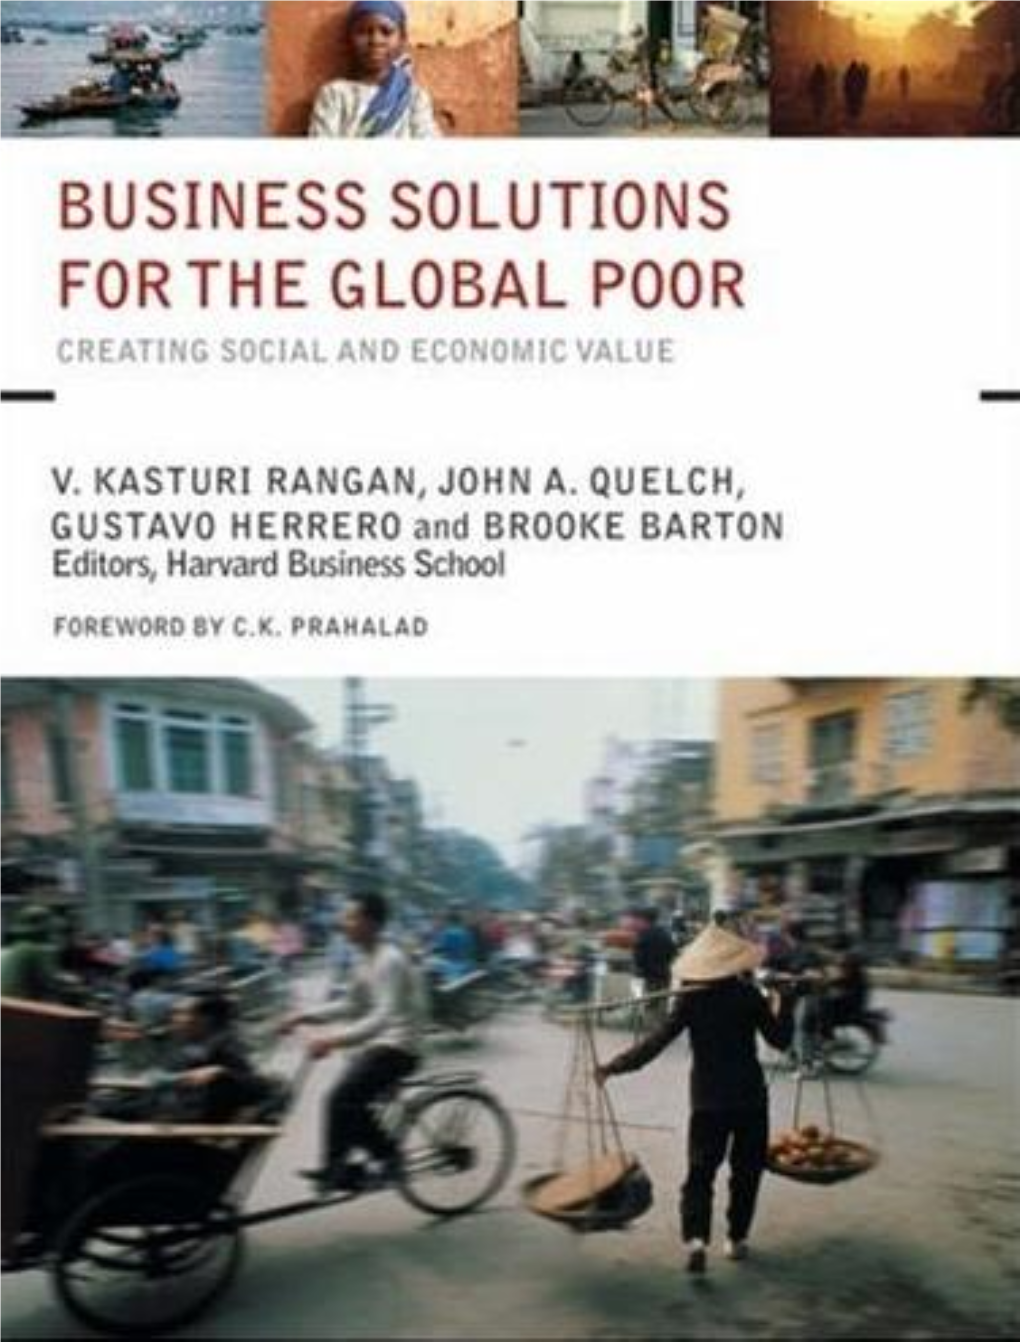 Viable Business Models to Serve Low-Income Consumers: Lessons from the Philippines 207 Gerardo C